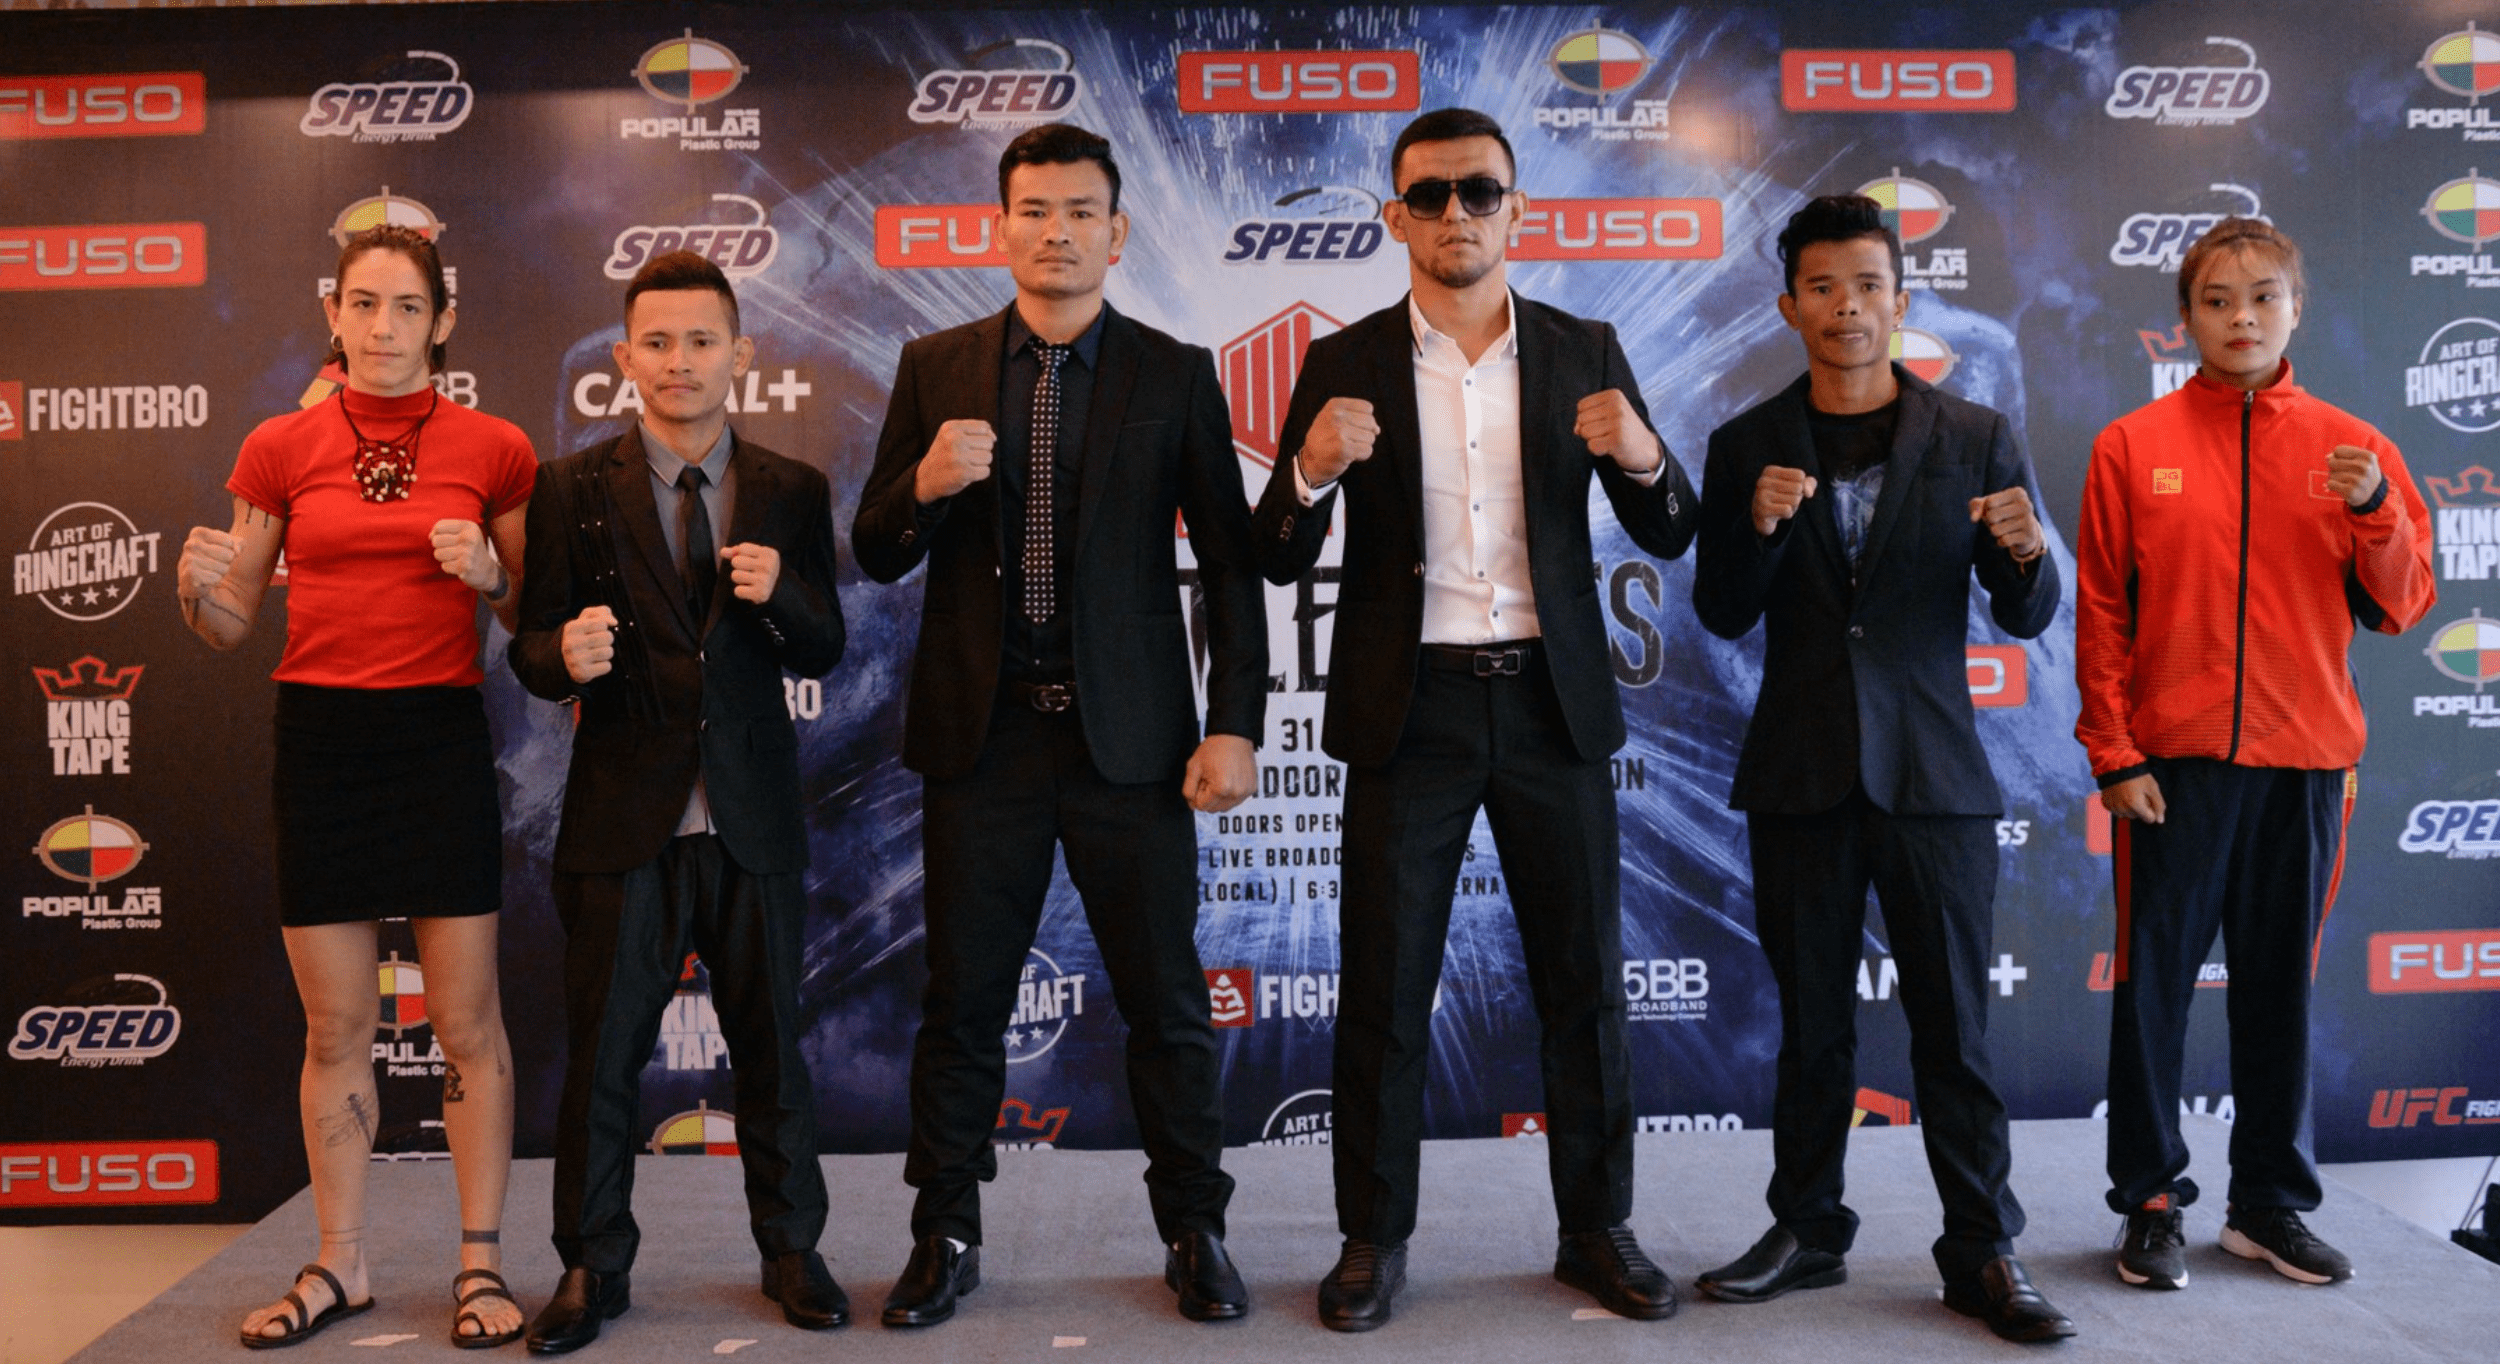 The World Lethwei Championship Plans To Go Global In 2020